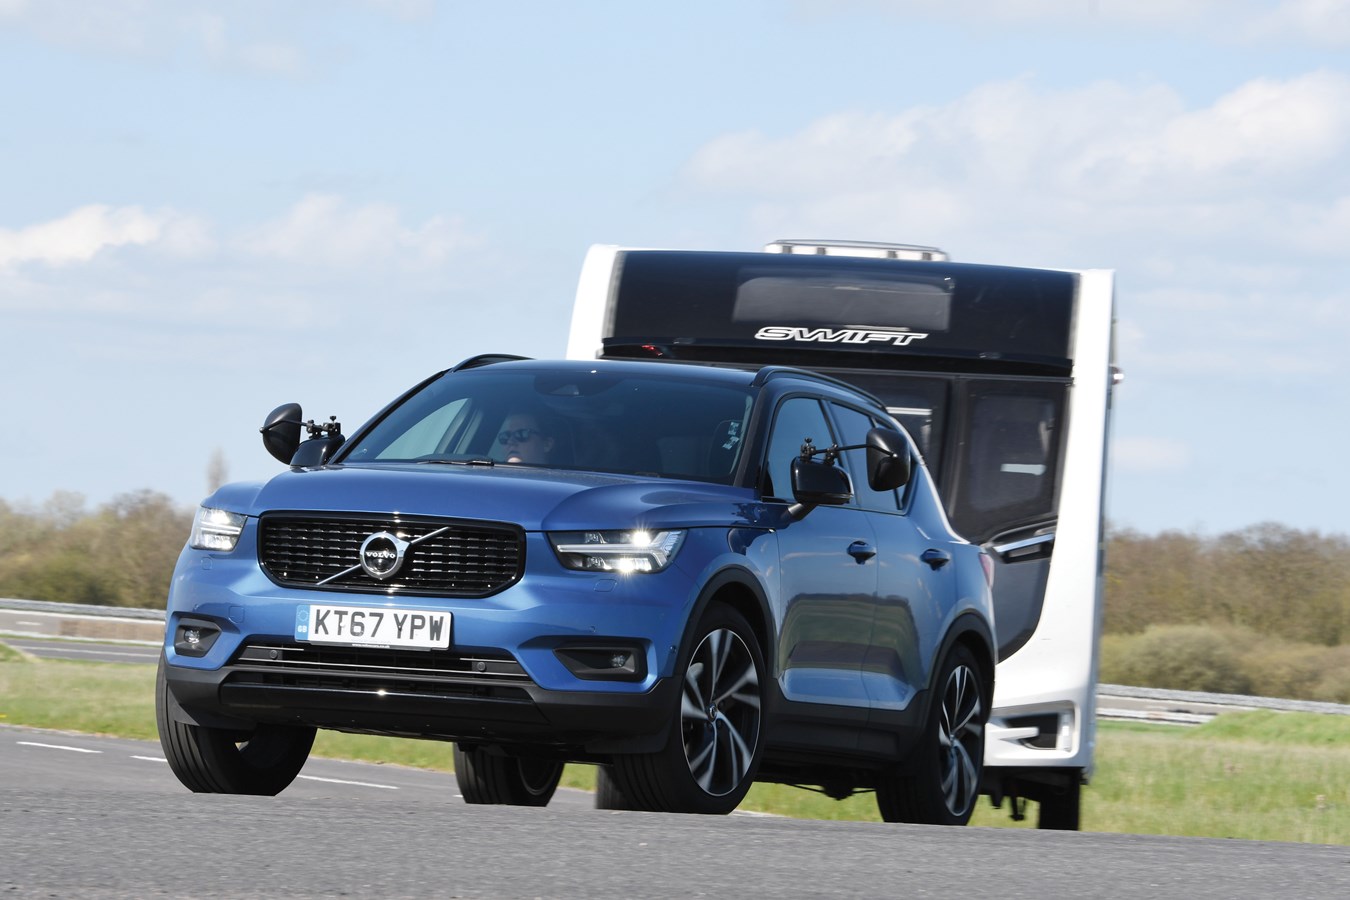 Volvo XC40 named Best Family SUV at Tow Car Awards 2018